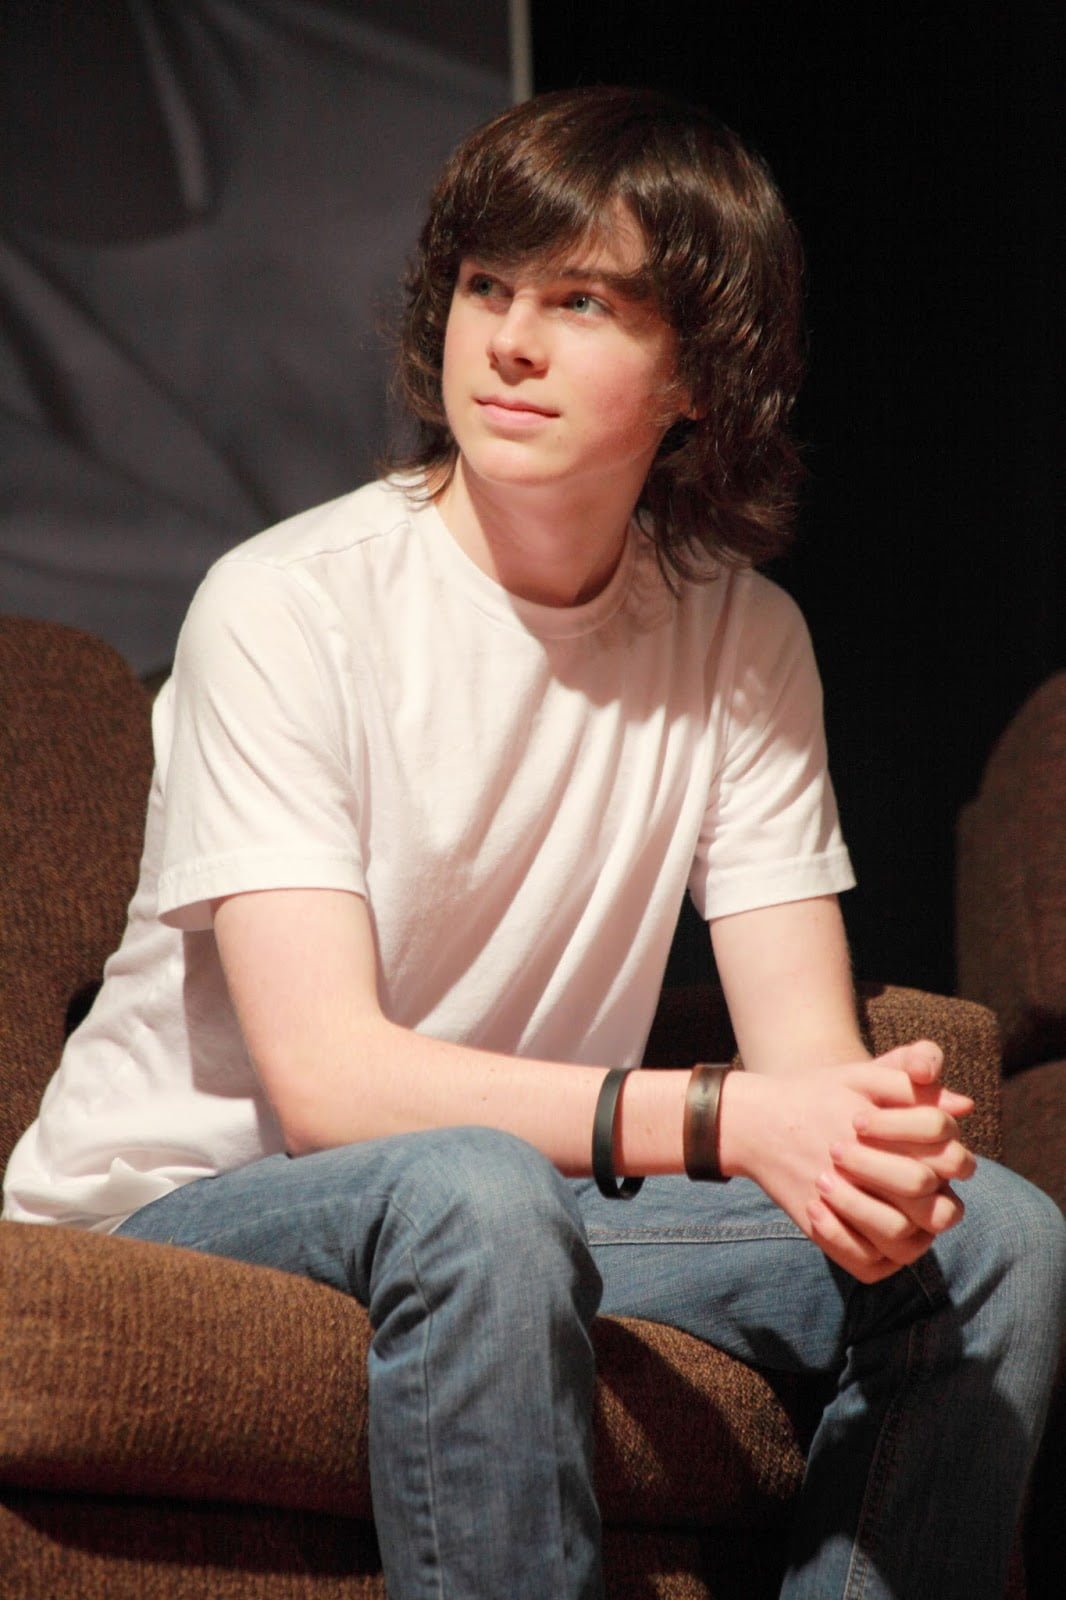 Chandler Riggs younger photo two at blogspot.com